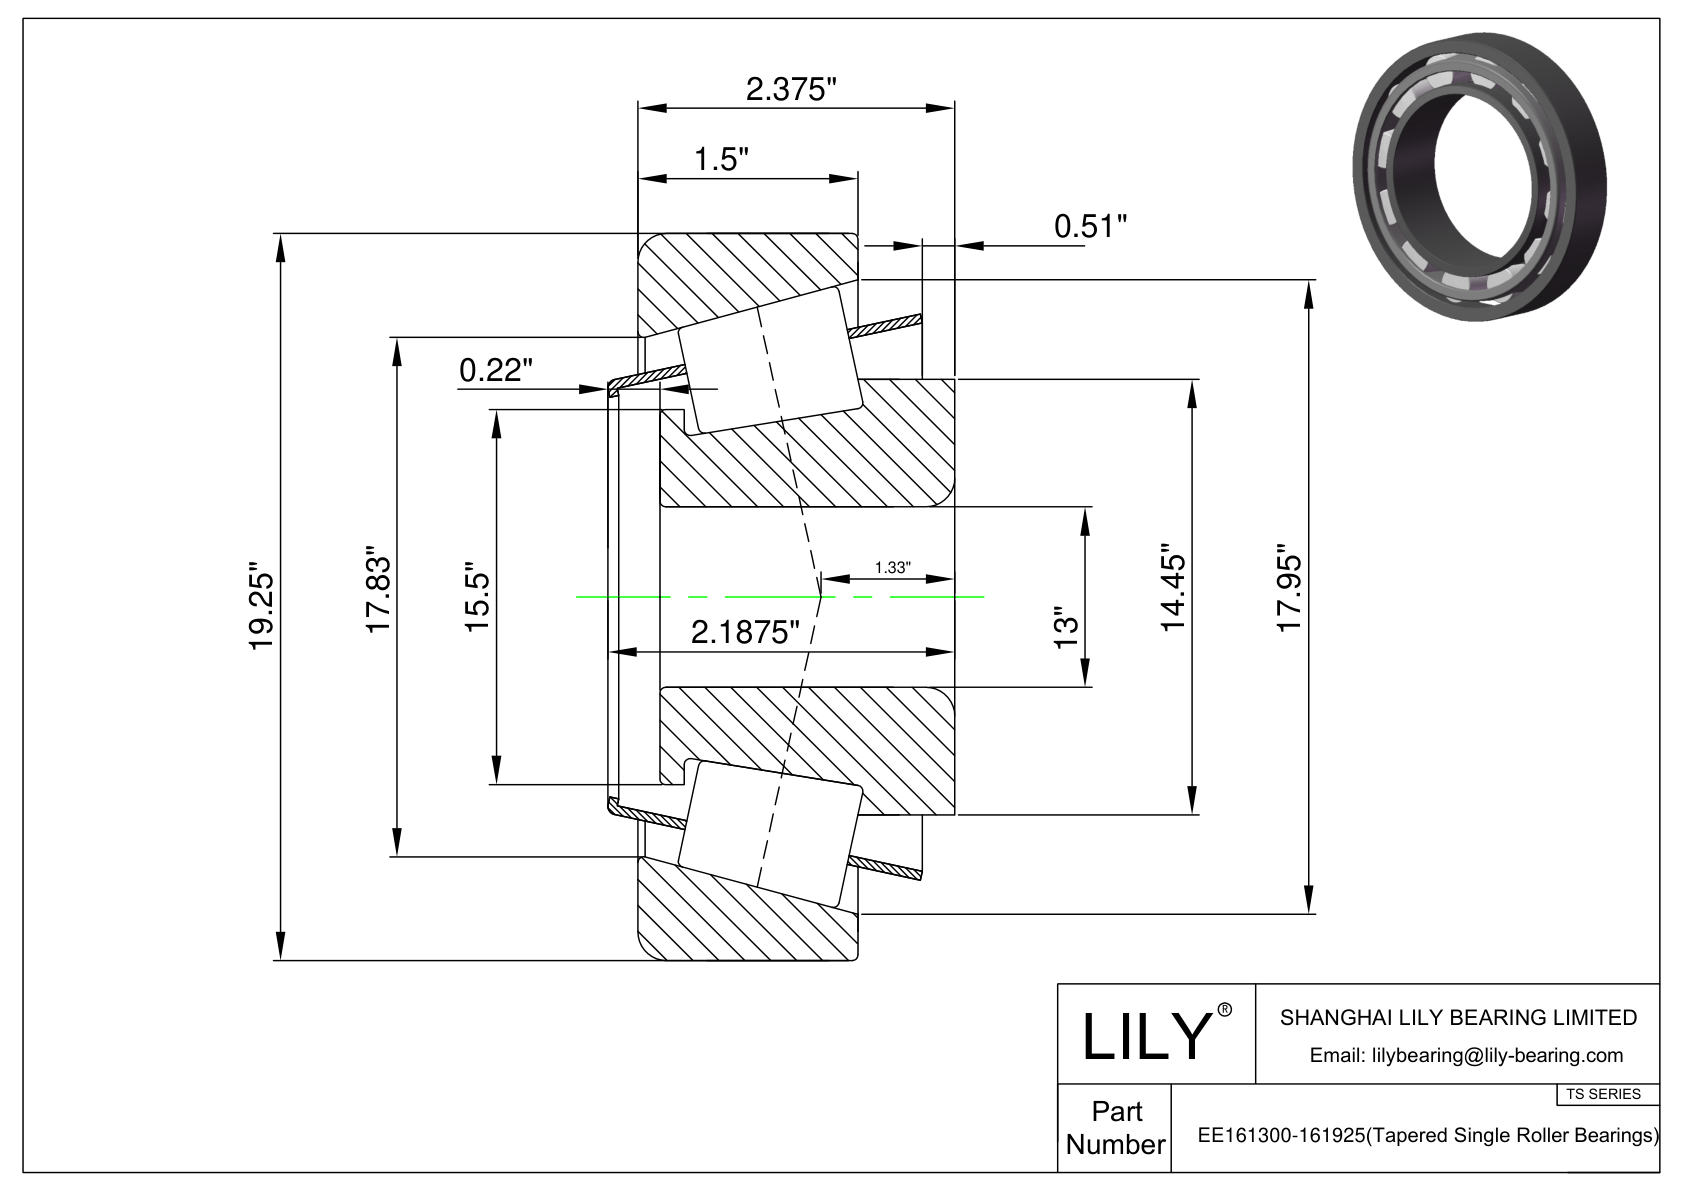 EE161300-161925 TS (Tapered Single Roller Bearings) (Imperial) cad drawing